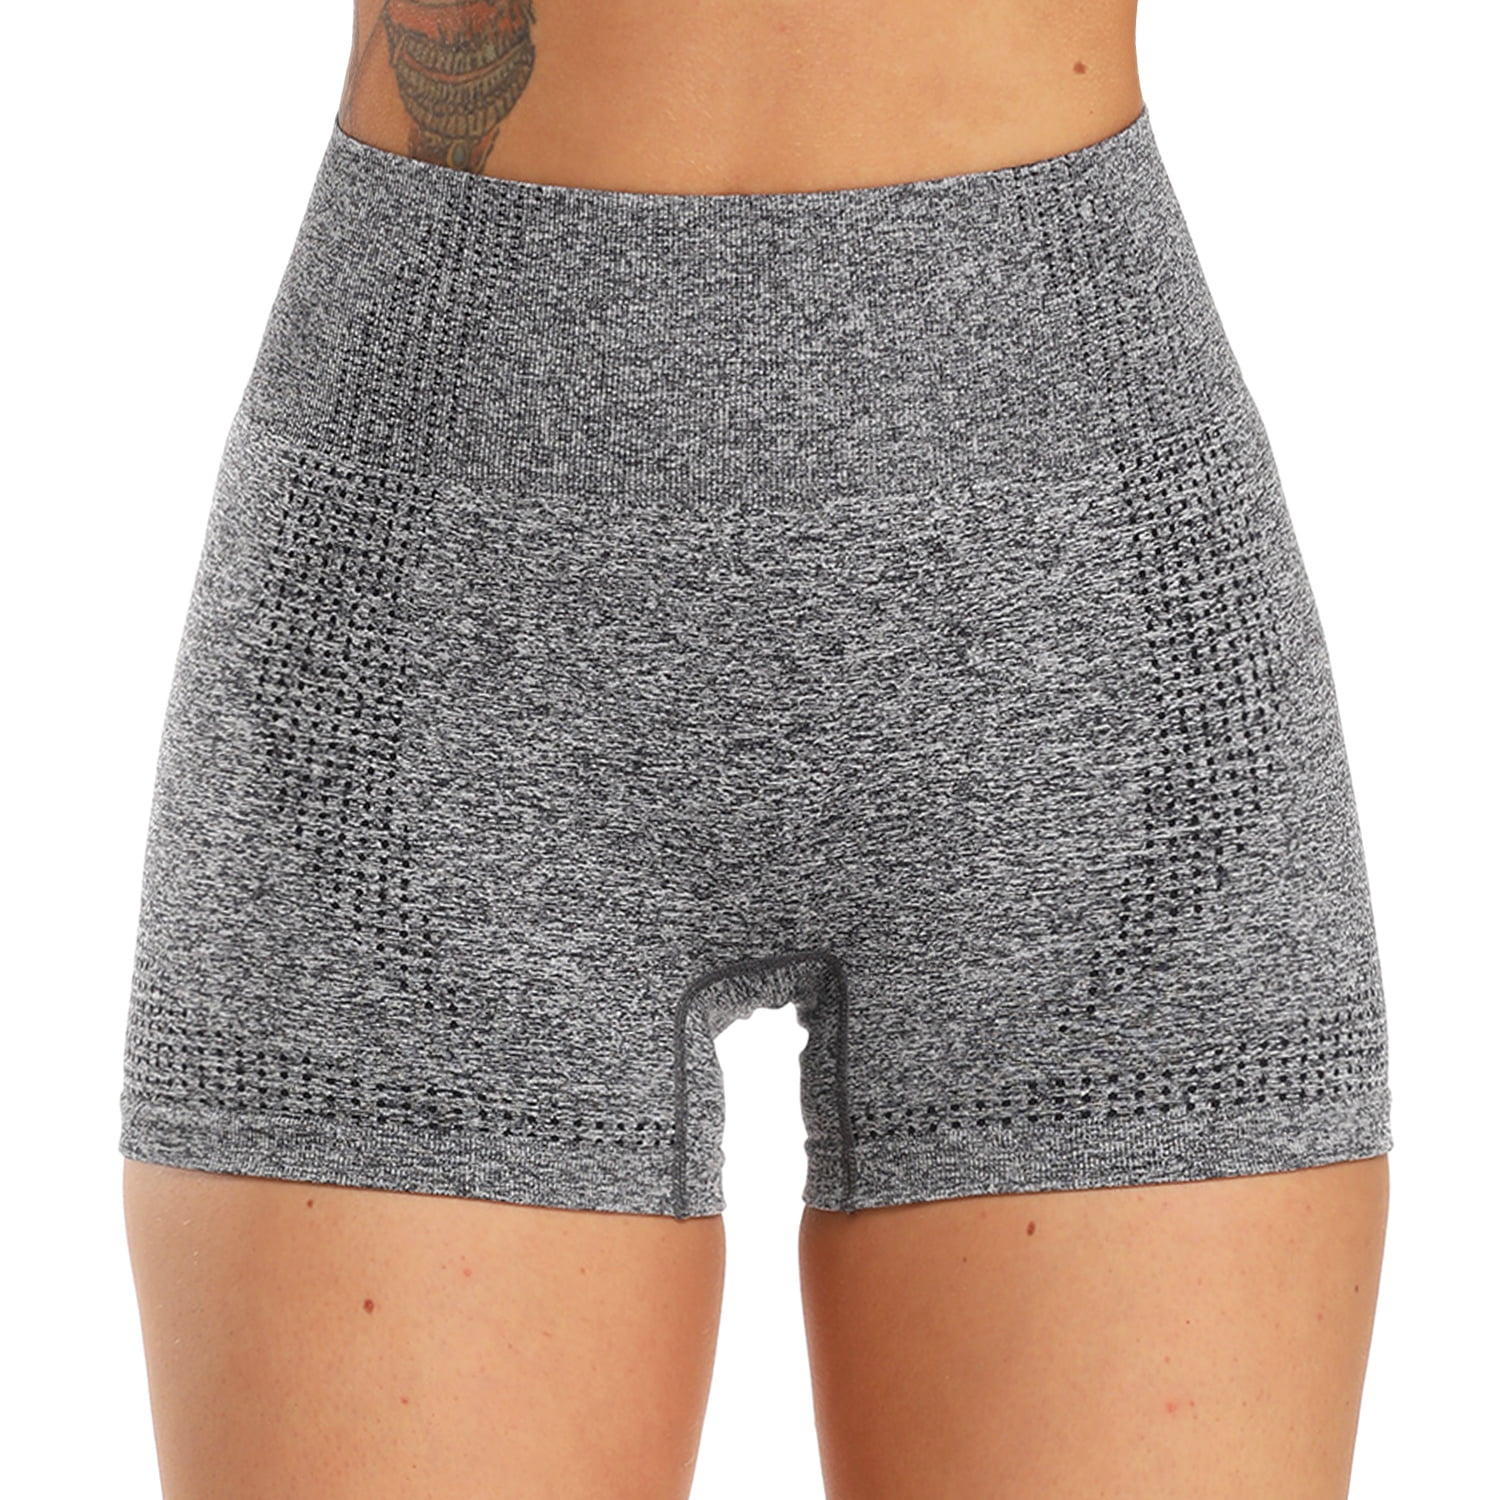 30 Minute Grey Workout Shorts for Burn Fat fast